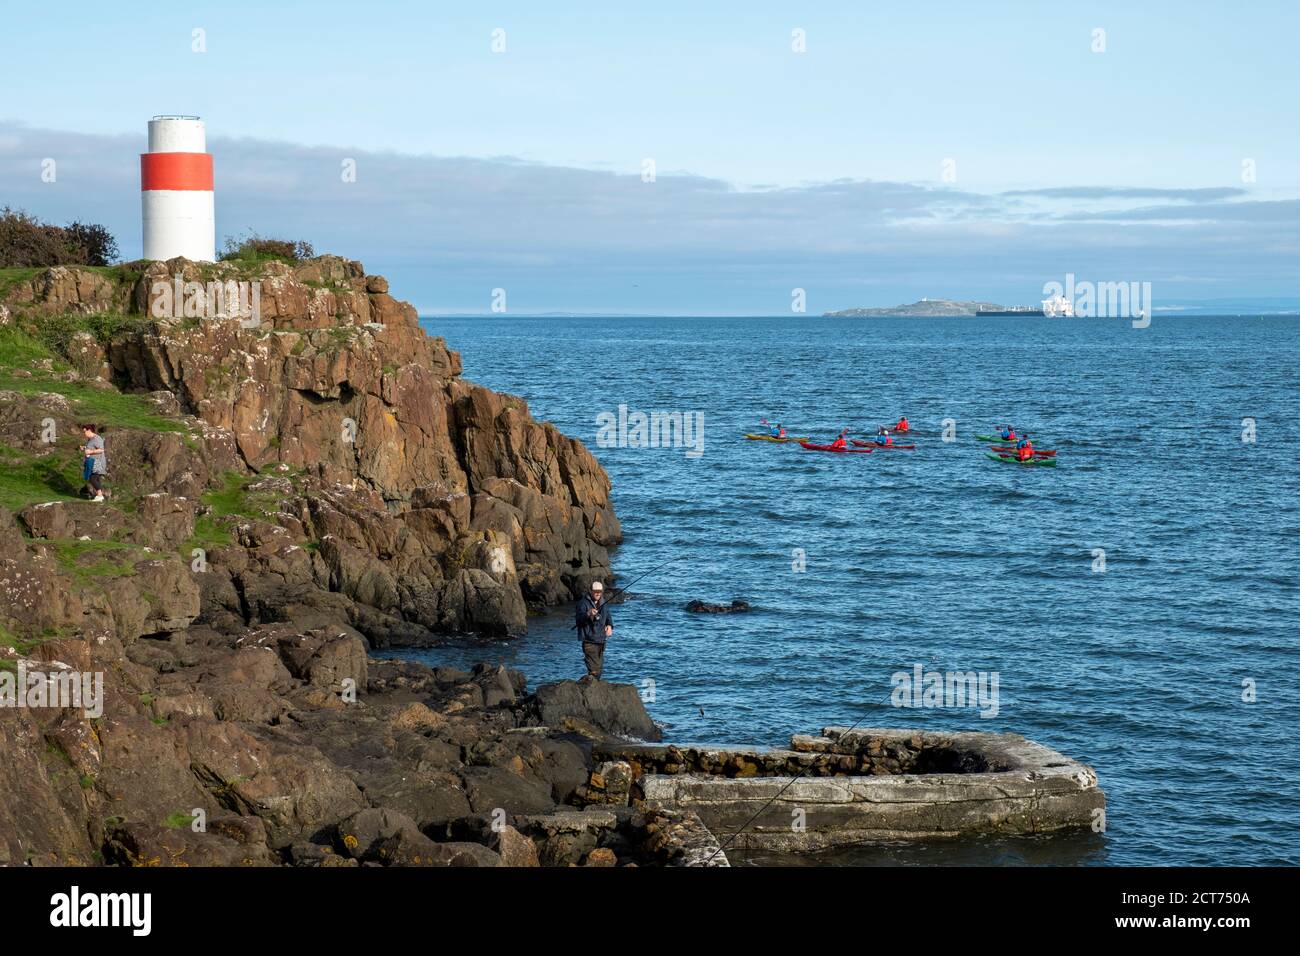 Sea Kayakers pass as people fish from a rocky outcrop on the Fife coastline near Aberdour, Scotland. Stock Photo